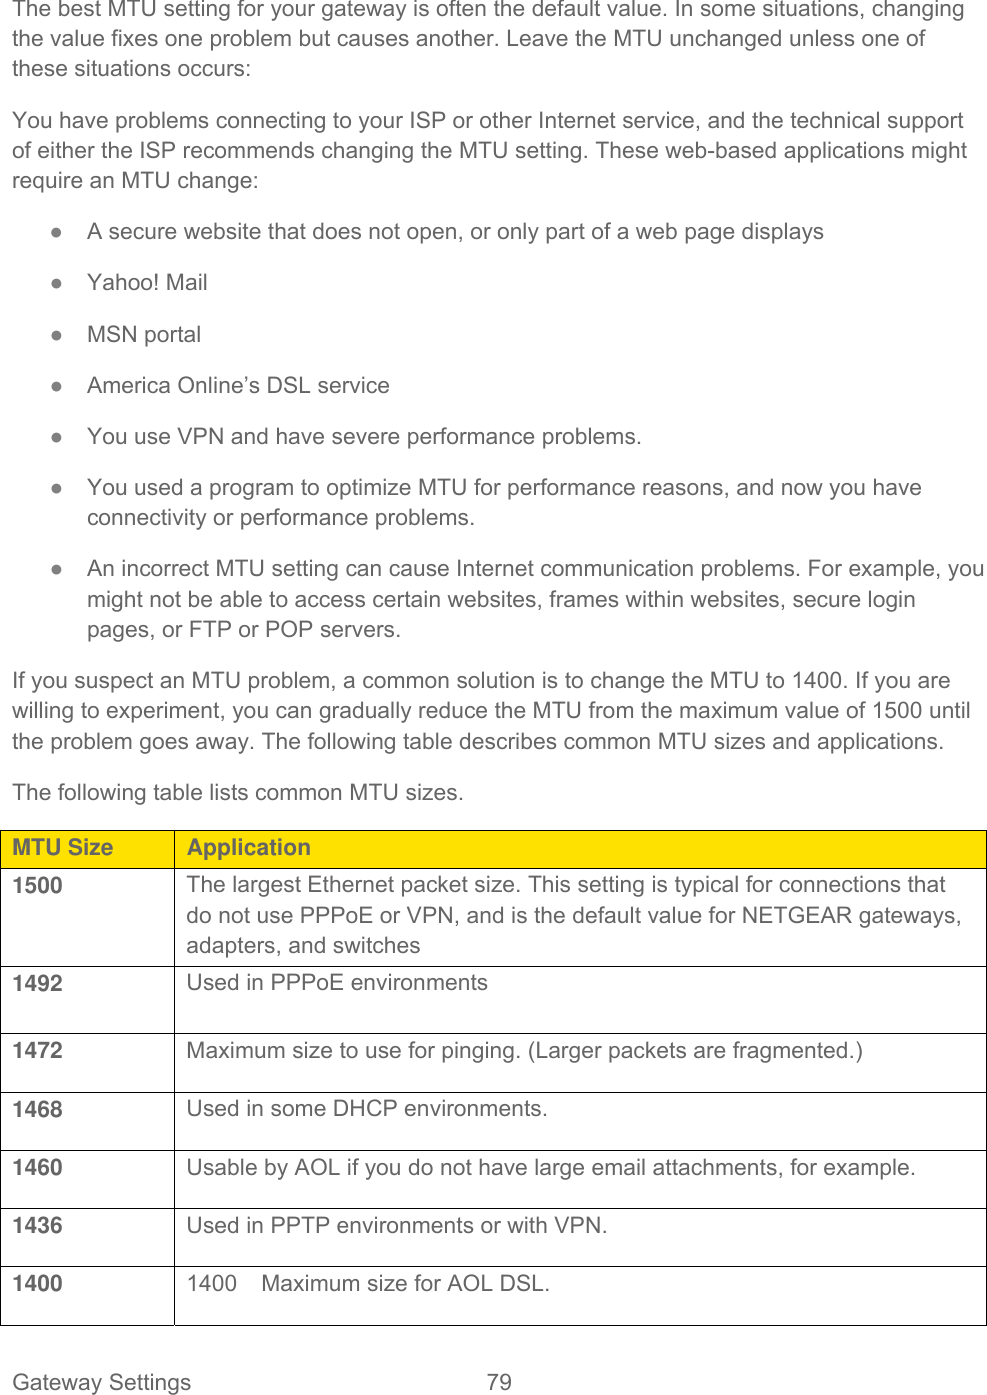 Gateway Settings  79   The best MTU setting for your gateway is often the default value. In some situations, changing the value fixes one problem but causes another. Leave the MTU unchanged unless one of these situations occurs: You have problems connecting to your ISP or other Internet service, and the technical support of either the ISP recommends changing the MTU setting. These web-based applications might require an MTU change: ● A secure website that does not open, or only part of a web page displays ● Yahoo! Mail ● MSN portal ● America Online’s DSL service ● You use VPN and have severe performance problems. ● You used a program to optimize MTU for performance reasons, and now you have connectivity or performance problems. ● An incorrect MTU setting can cause Internet communication problems. For example, you might not be able to access certain websites, frames within websites, secure login pages, or FTP or POP servers. If you suspect an MTU problem, a common solution is to change the MTU to 1400. If you are willing to experiment, you can gradually reduce the MTU from the maximum value of 1500 until the problem goes away. The following table describes common MTU sizes and applications.  The following table lists common MTU sizes. MTU Size  Application 1500  The largest Ethernet packet size. This setting is typical for connections that do not use PPPoE or VPN, and is the default value for NETGEAR gateways, adapters, and switches 1492  Used in PPPoE environments  1472  Maximum size to use for pinging. (Larger packets are fragmented.) 1468  Used in some DHCP environments. 1460  Usable by AOL if you do not have large email attachments, for example. 1436  Used in PPTP environments or with VPN. 1400  1400  Maximum size for AOL DSL. 